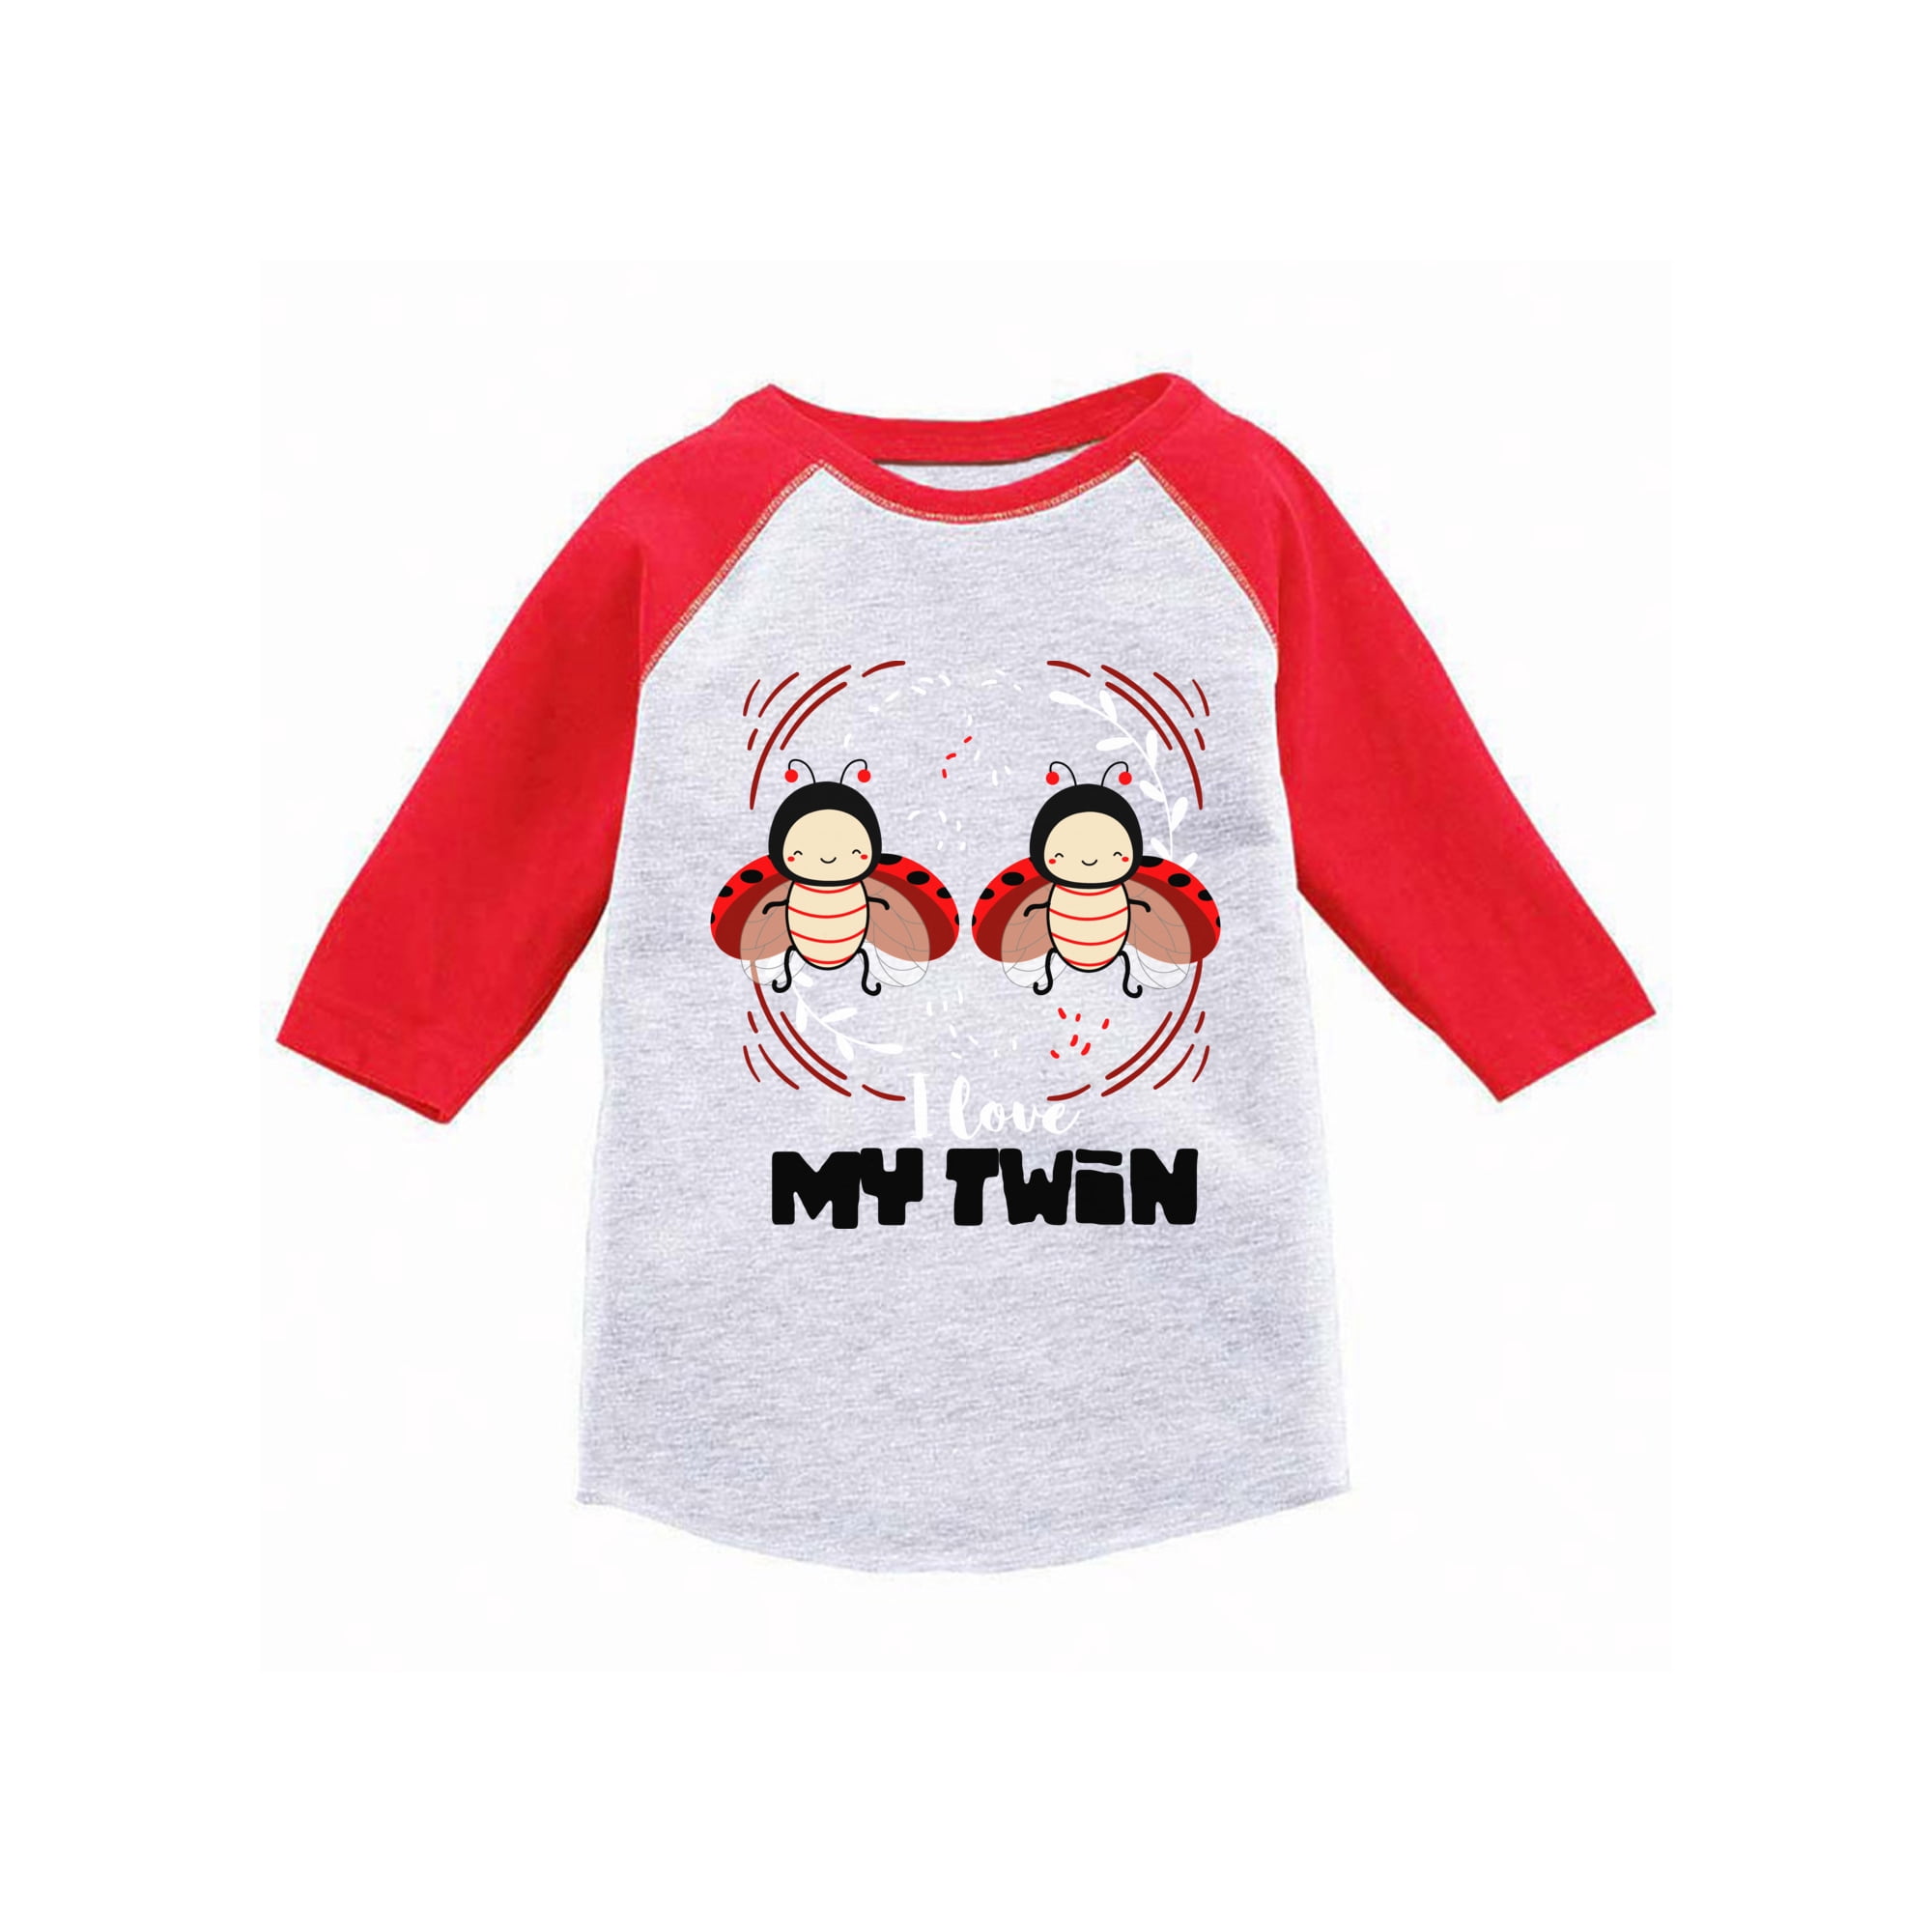 Awkward Styles I Love My Twin Toddler Raglan Twins Party Outfit Twins Birthday Gifts Twins Baseball Shirts Cute Jersey Tshirts for Girls Twins Cute